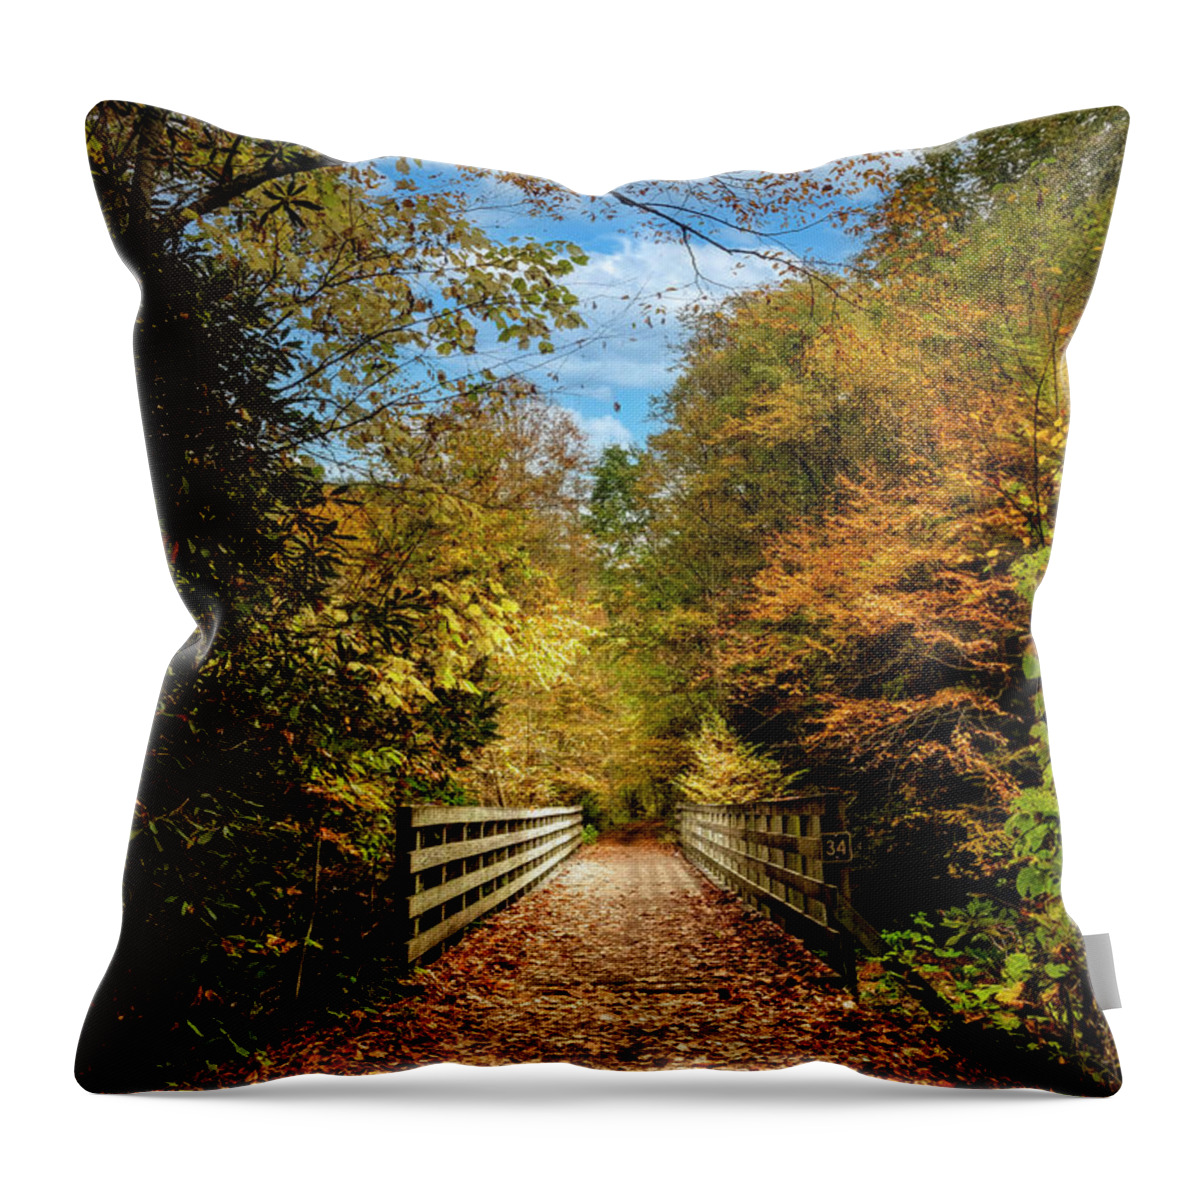 Clouds Throw Pillow featuring the photograph Creeper Trail Wooden Bridge Damascus Virginia by Debra and Dave Vanderlaan